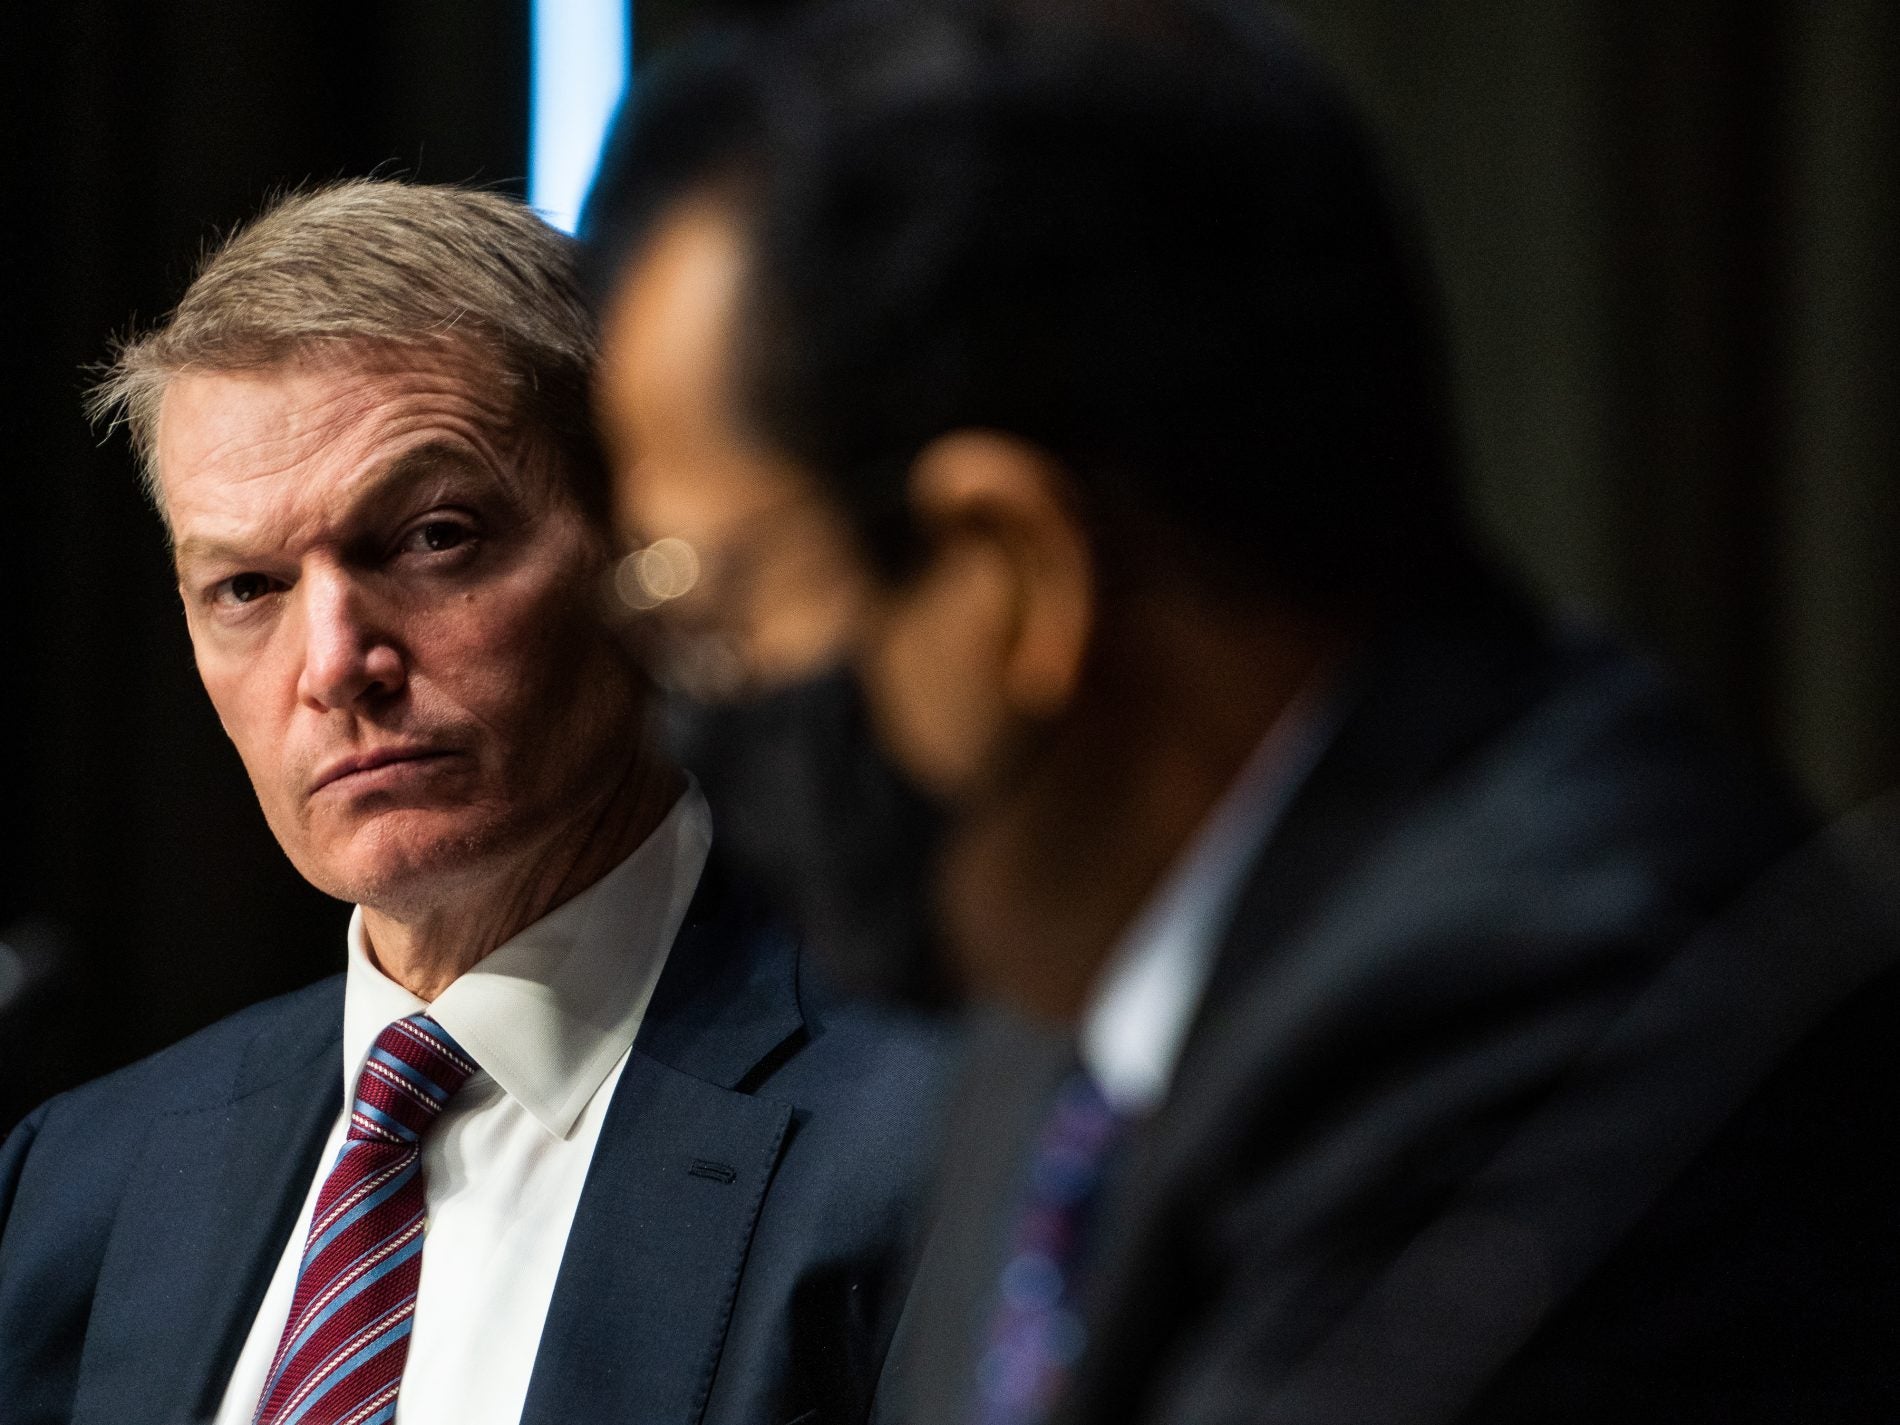 Kevin Mandia, CEO of the cybersecurity firm FireEye, said the Russians didn't just attack SolarWinds, they took aim at trust. (Demetrius Freeman/Pool/Getty Images)